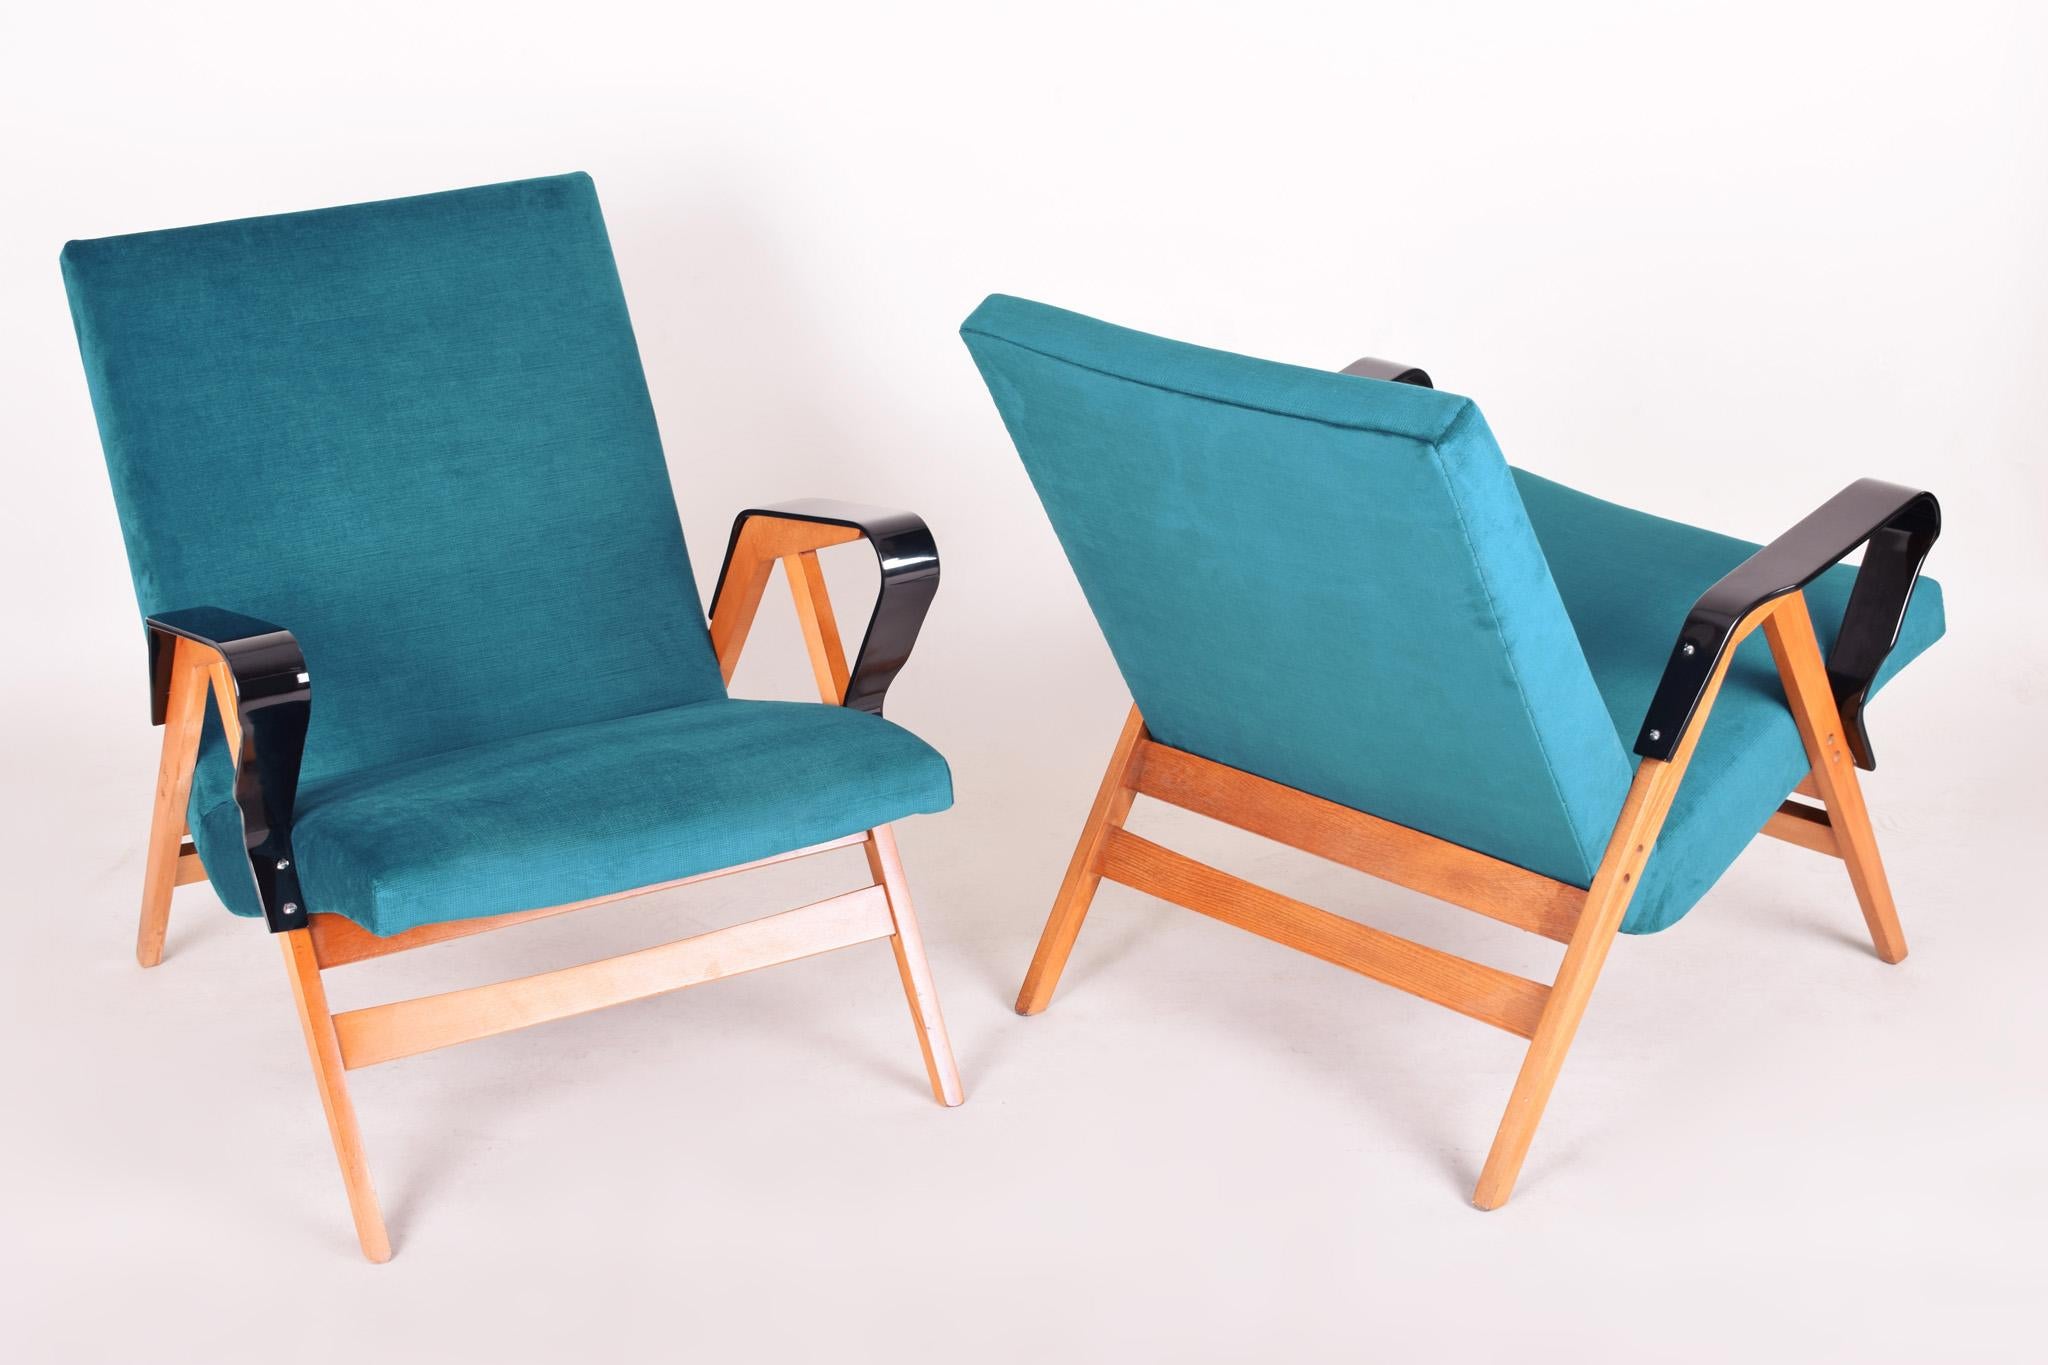 Pair of Blue Midcentury Armchairs, Made by Tatra Pravenec, 1950s Czechia In Good Condition For Sale In Horomerice, CZ